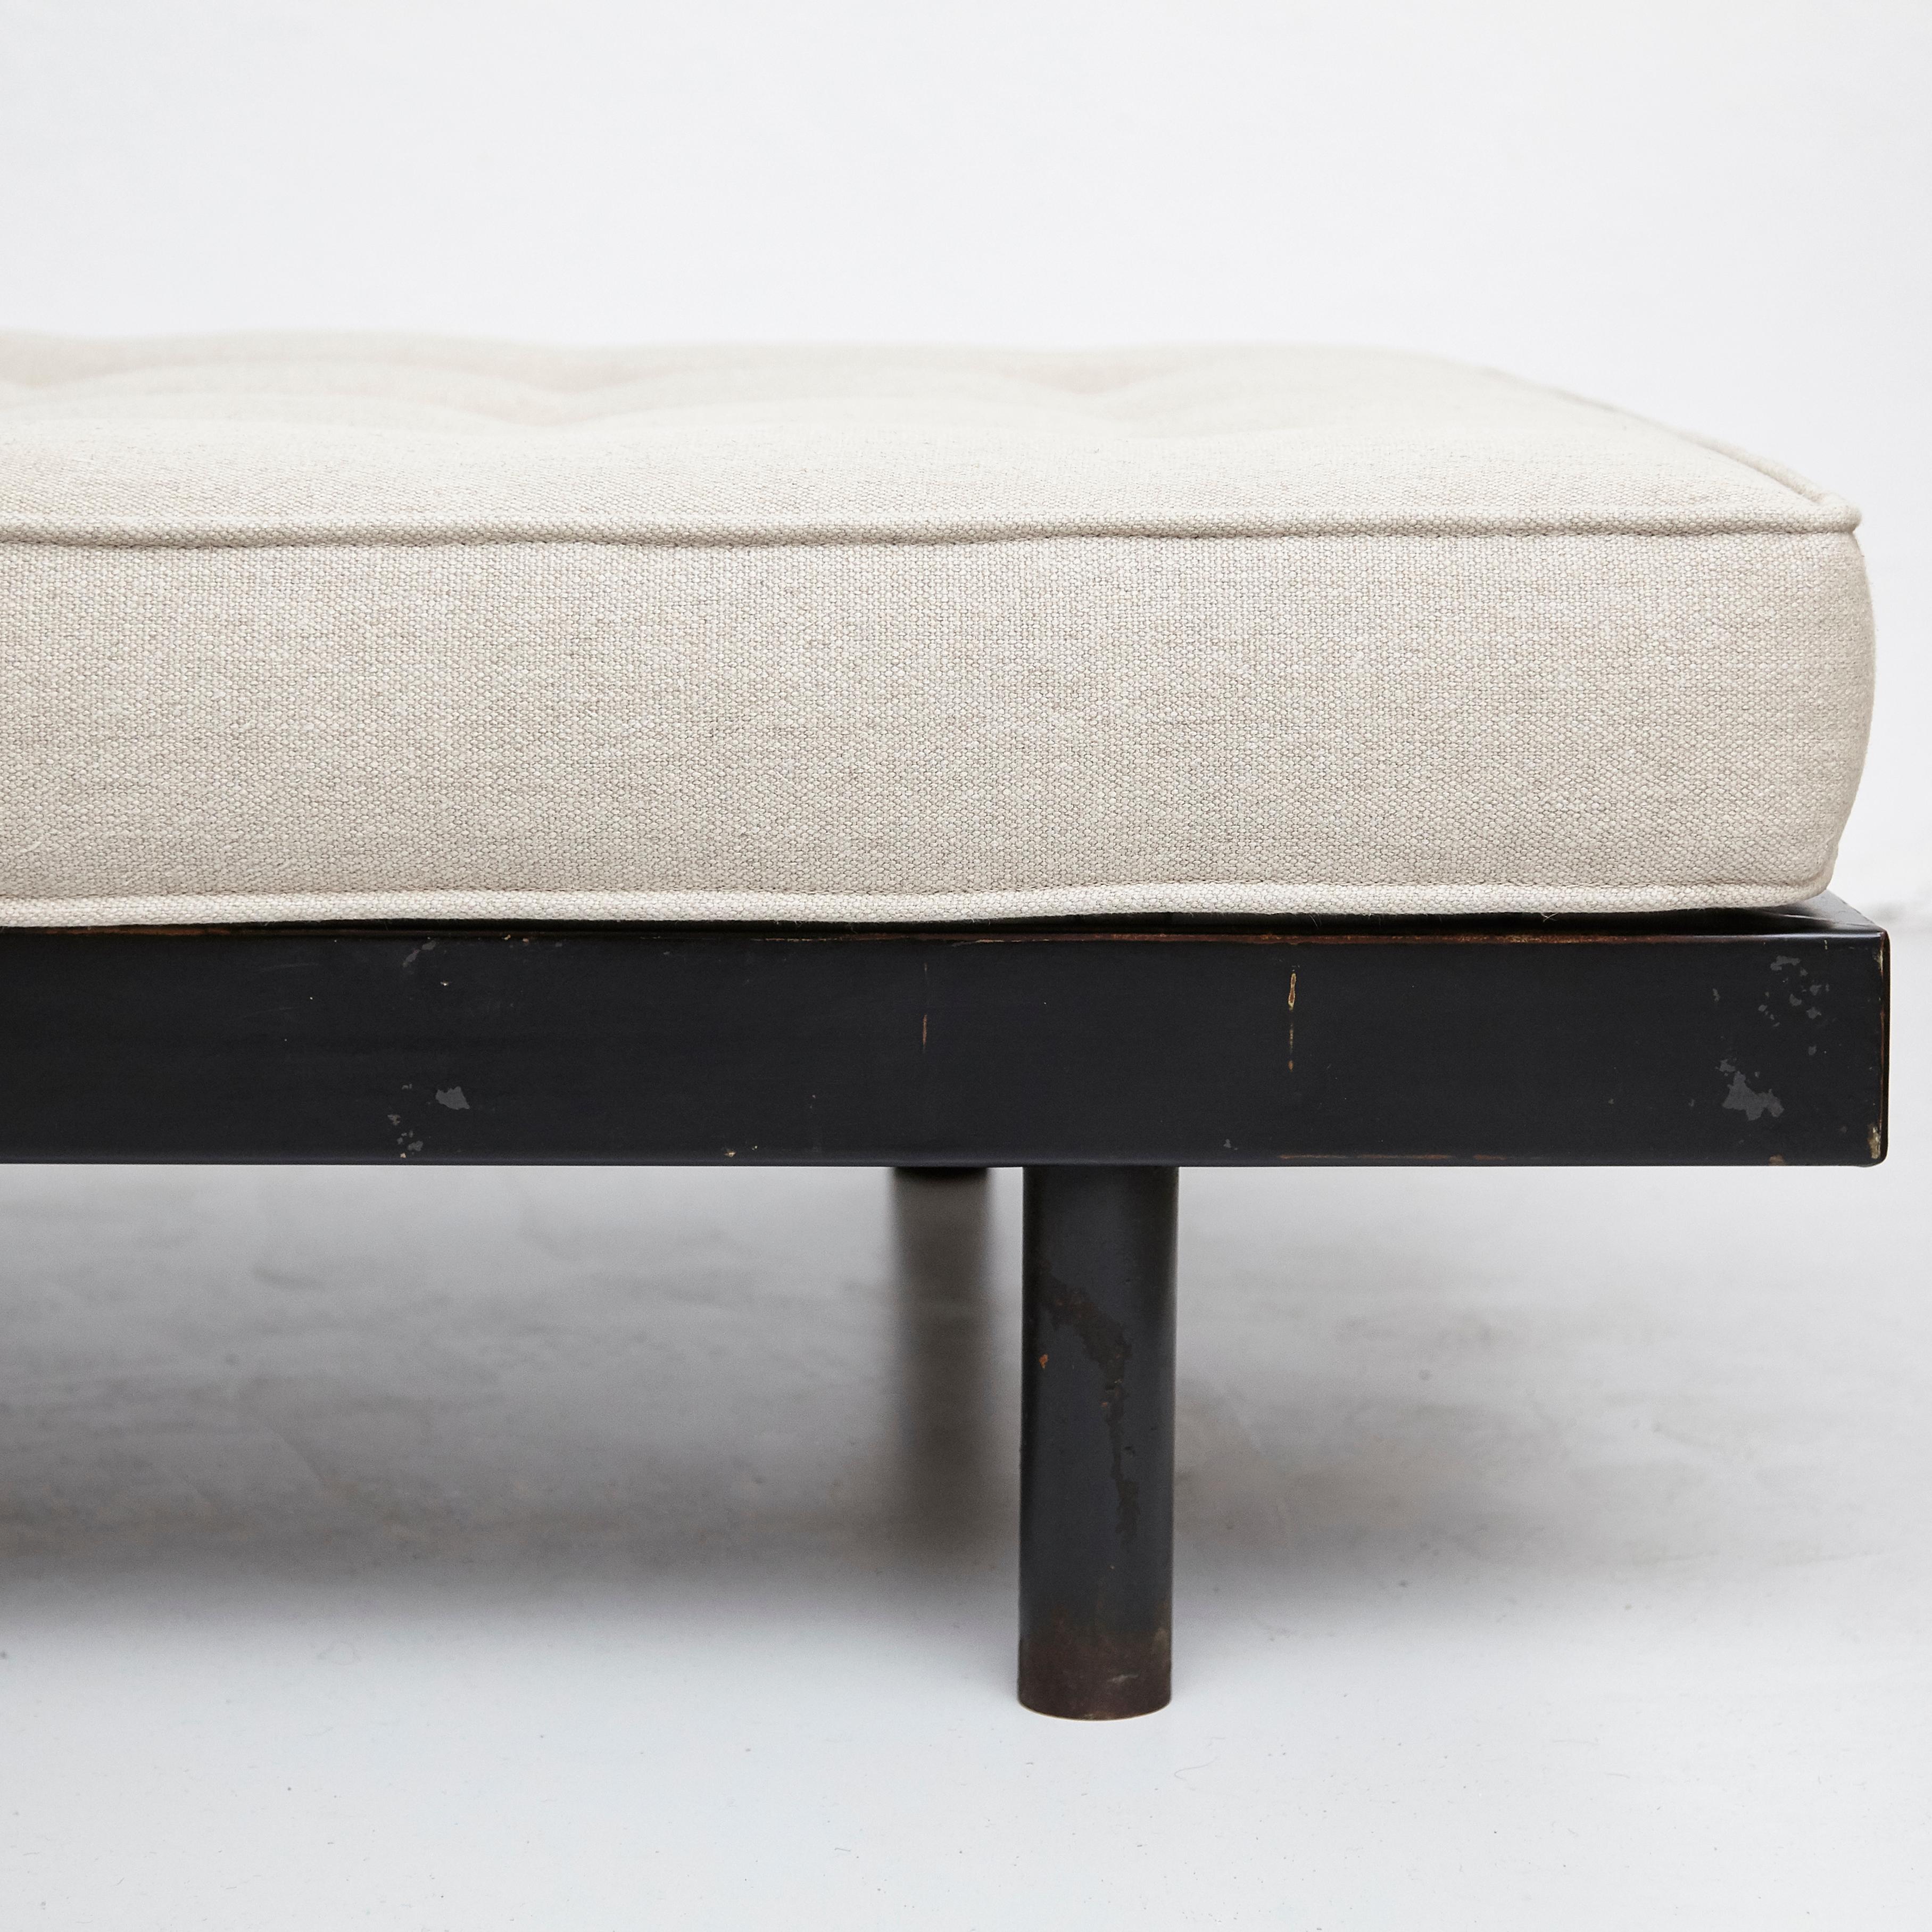 Jean Prouve Mid-Century Modern S.C.A.L. Daybed, circa 1950 8